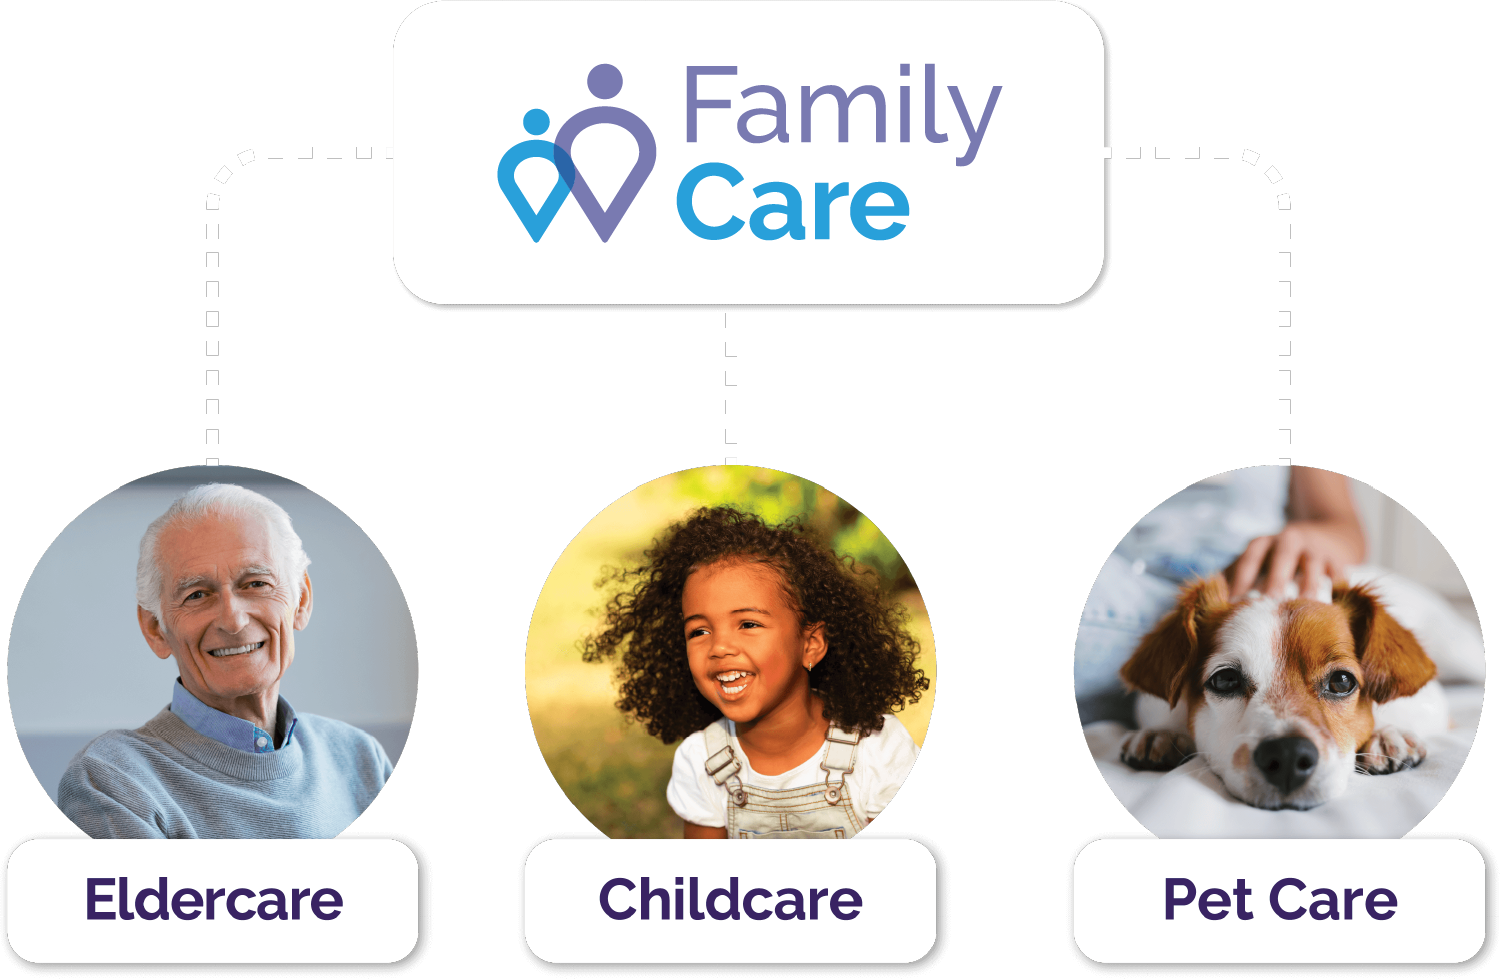 Family Care Logo and images showing eldercare, childcare and petcare